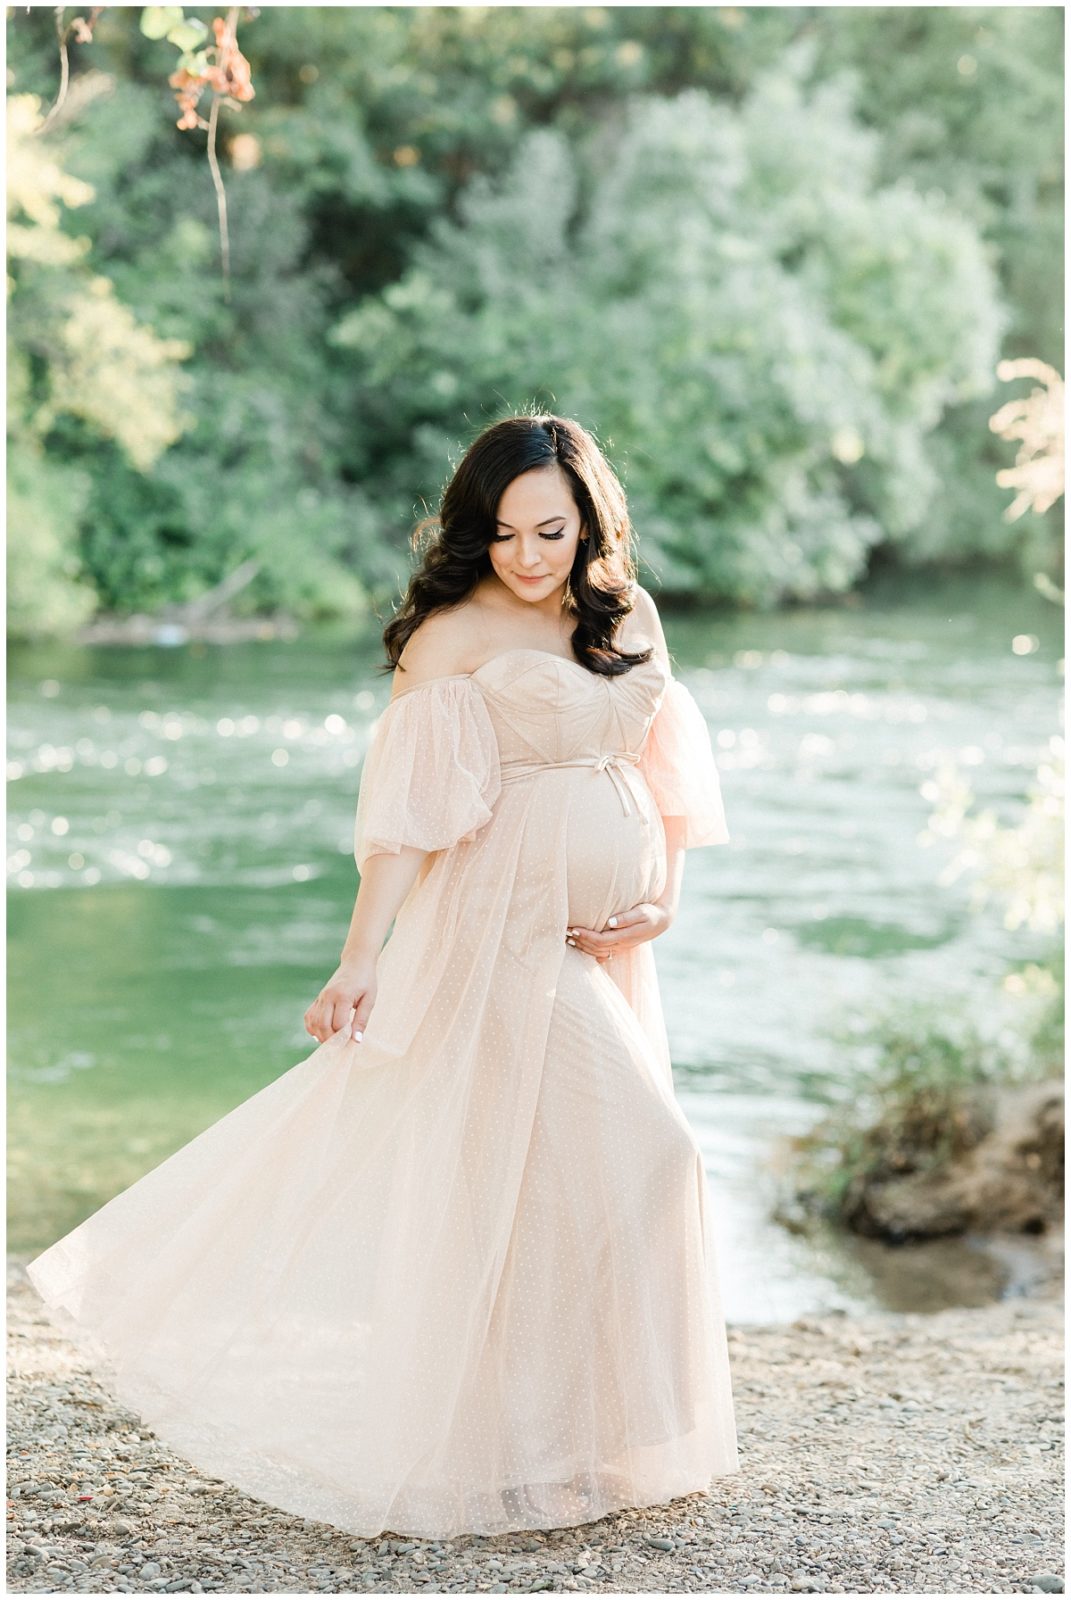 Romantic Maternity in Blush Gown